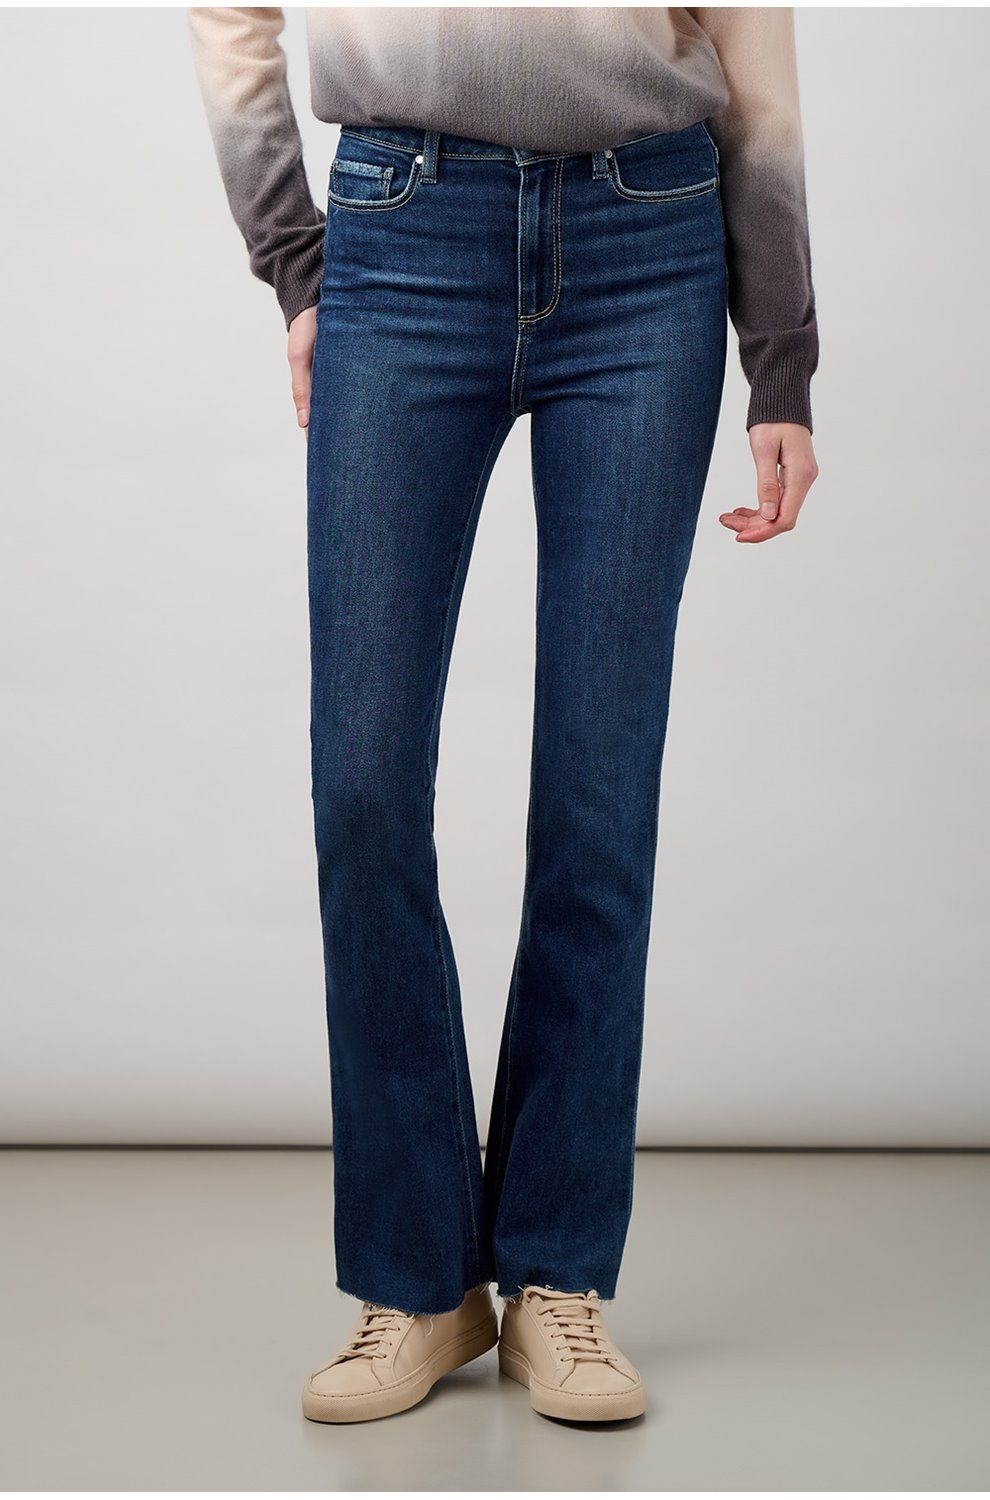 Trilogy Stores | Laurel Canyon Bootcut Jean in Montreux